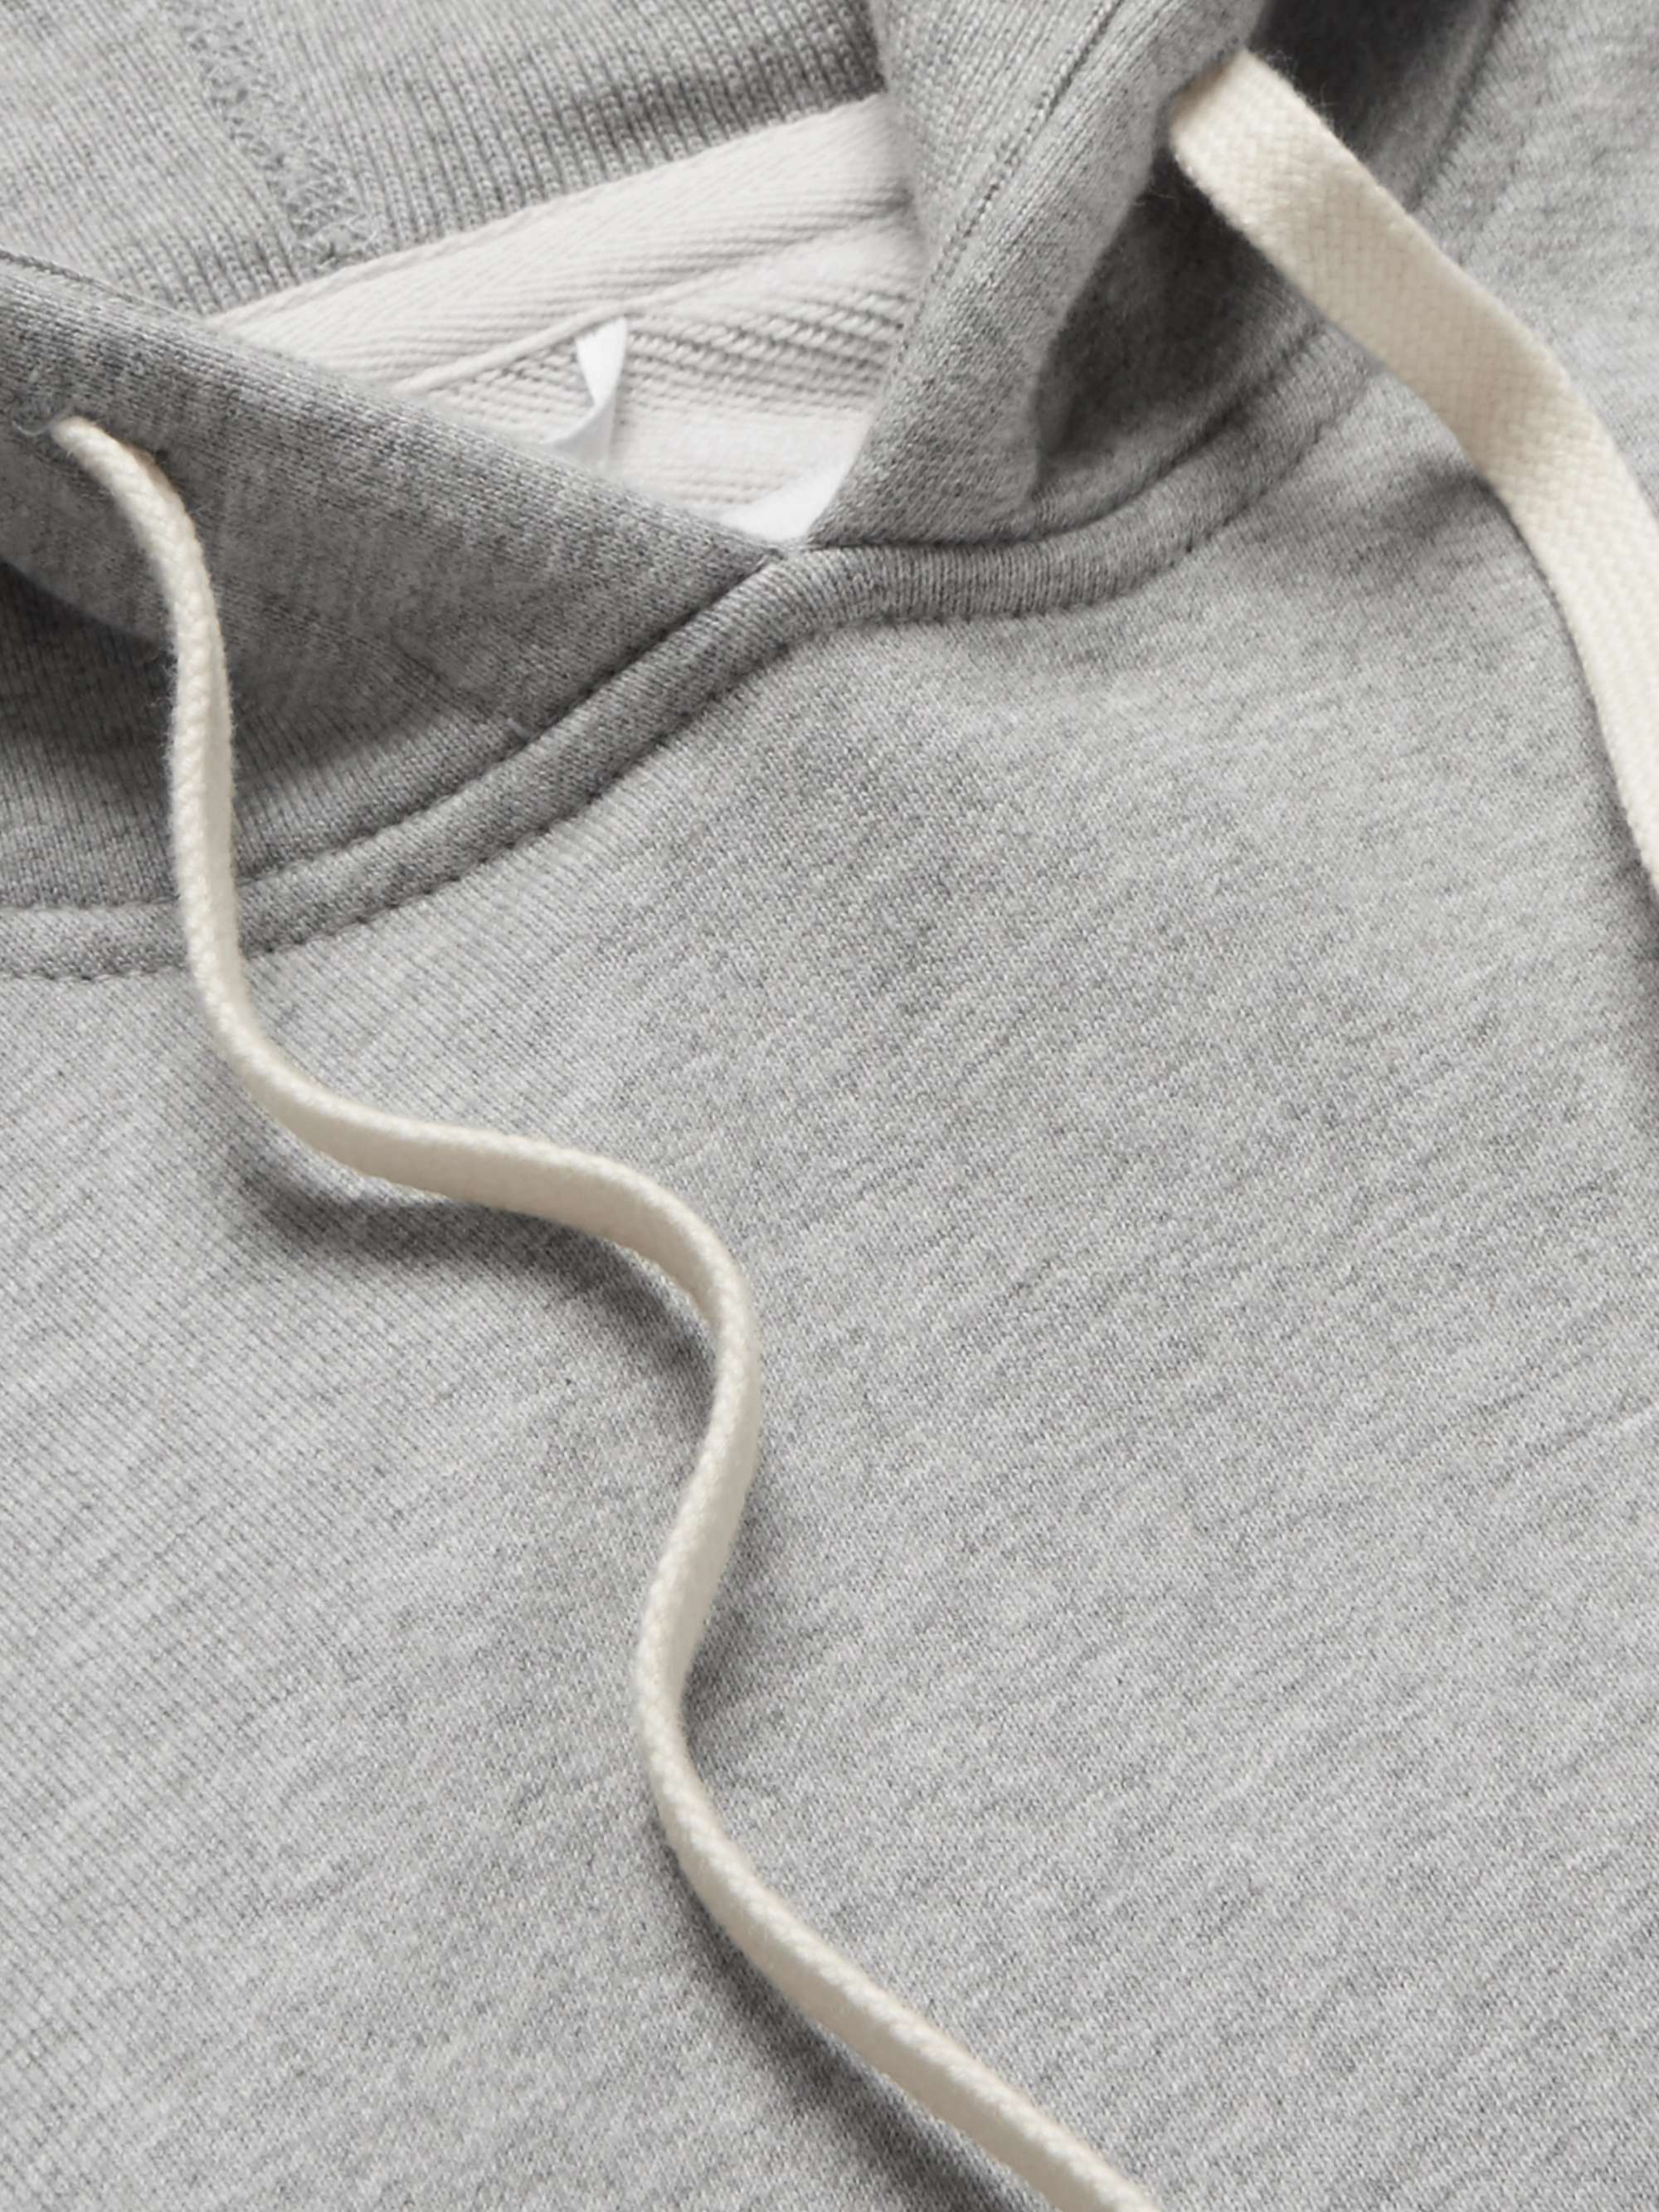 REIGNING CHAMP Loopback Cotton-Jersey Hoodie